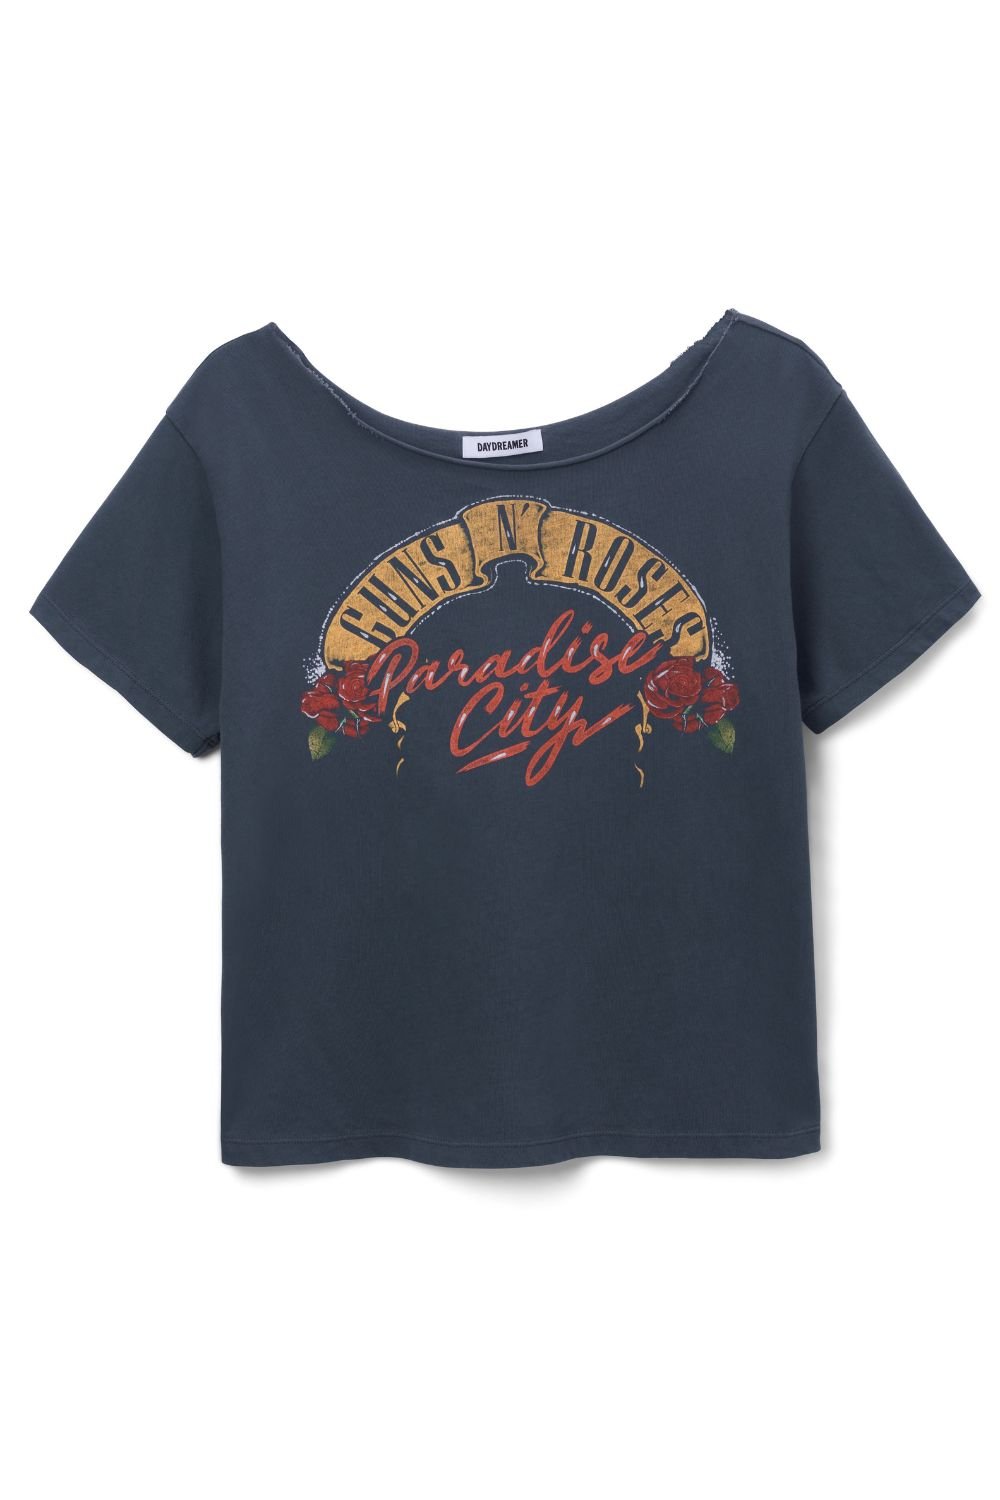 Daydreamer LA | Guns N' Roses Paradise Off The Shoulder Tee - Women's Shirts & Tops - Blooming Daily